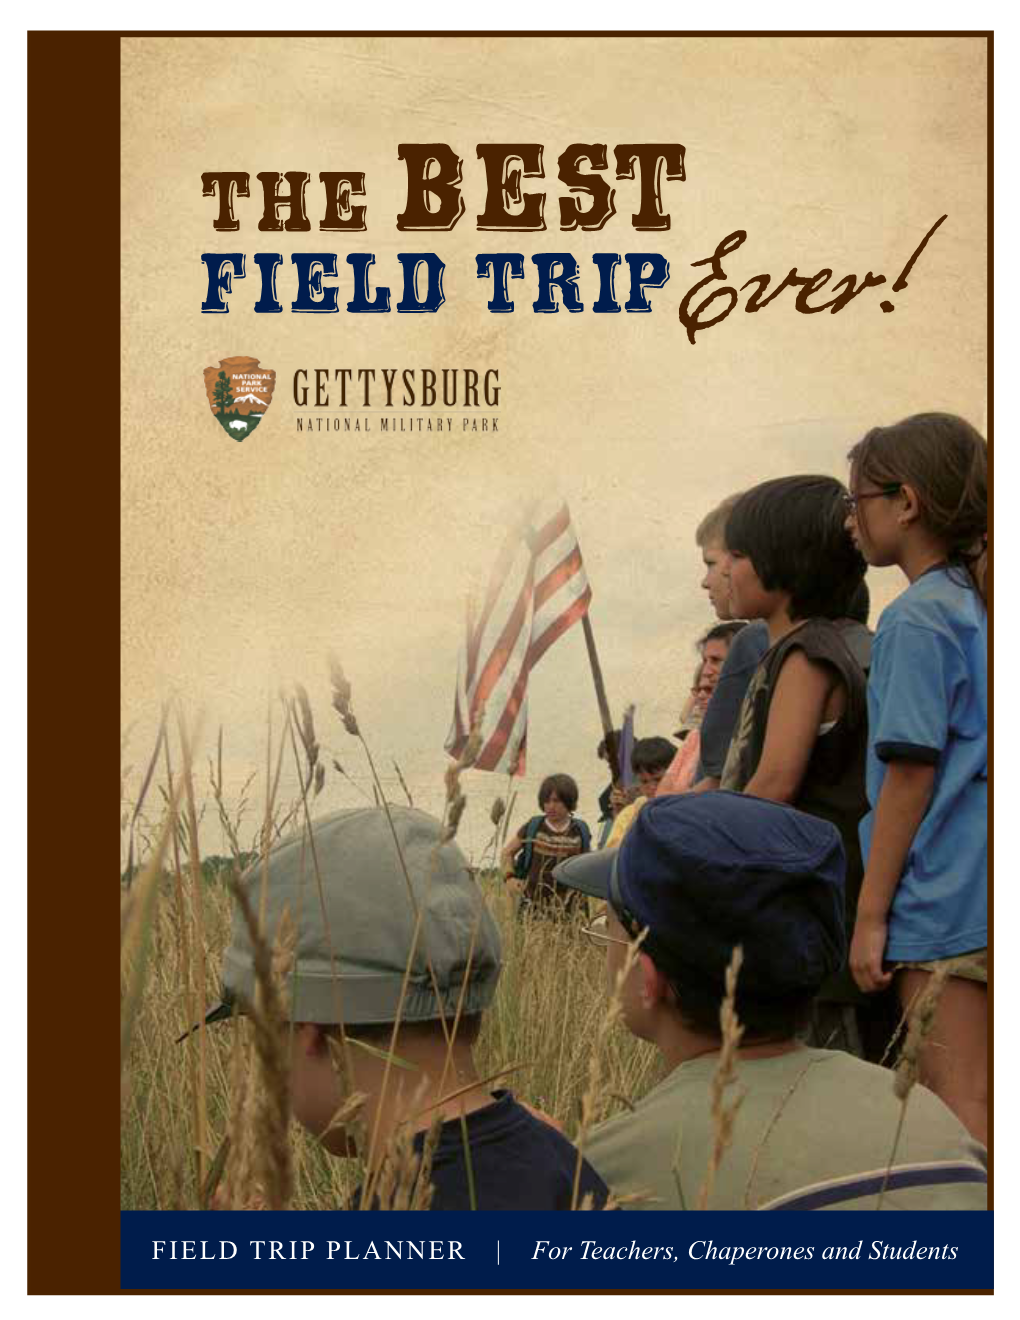 Field Trip Planner for Teachers, Chaperones and Students